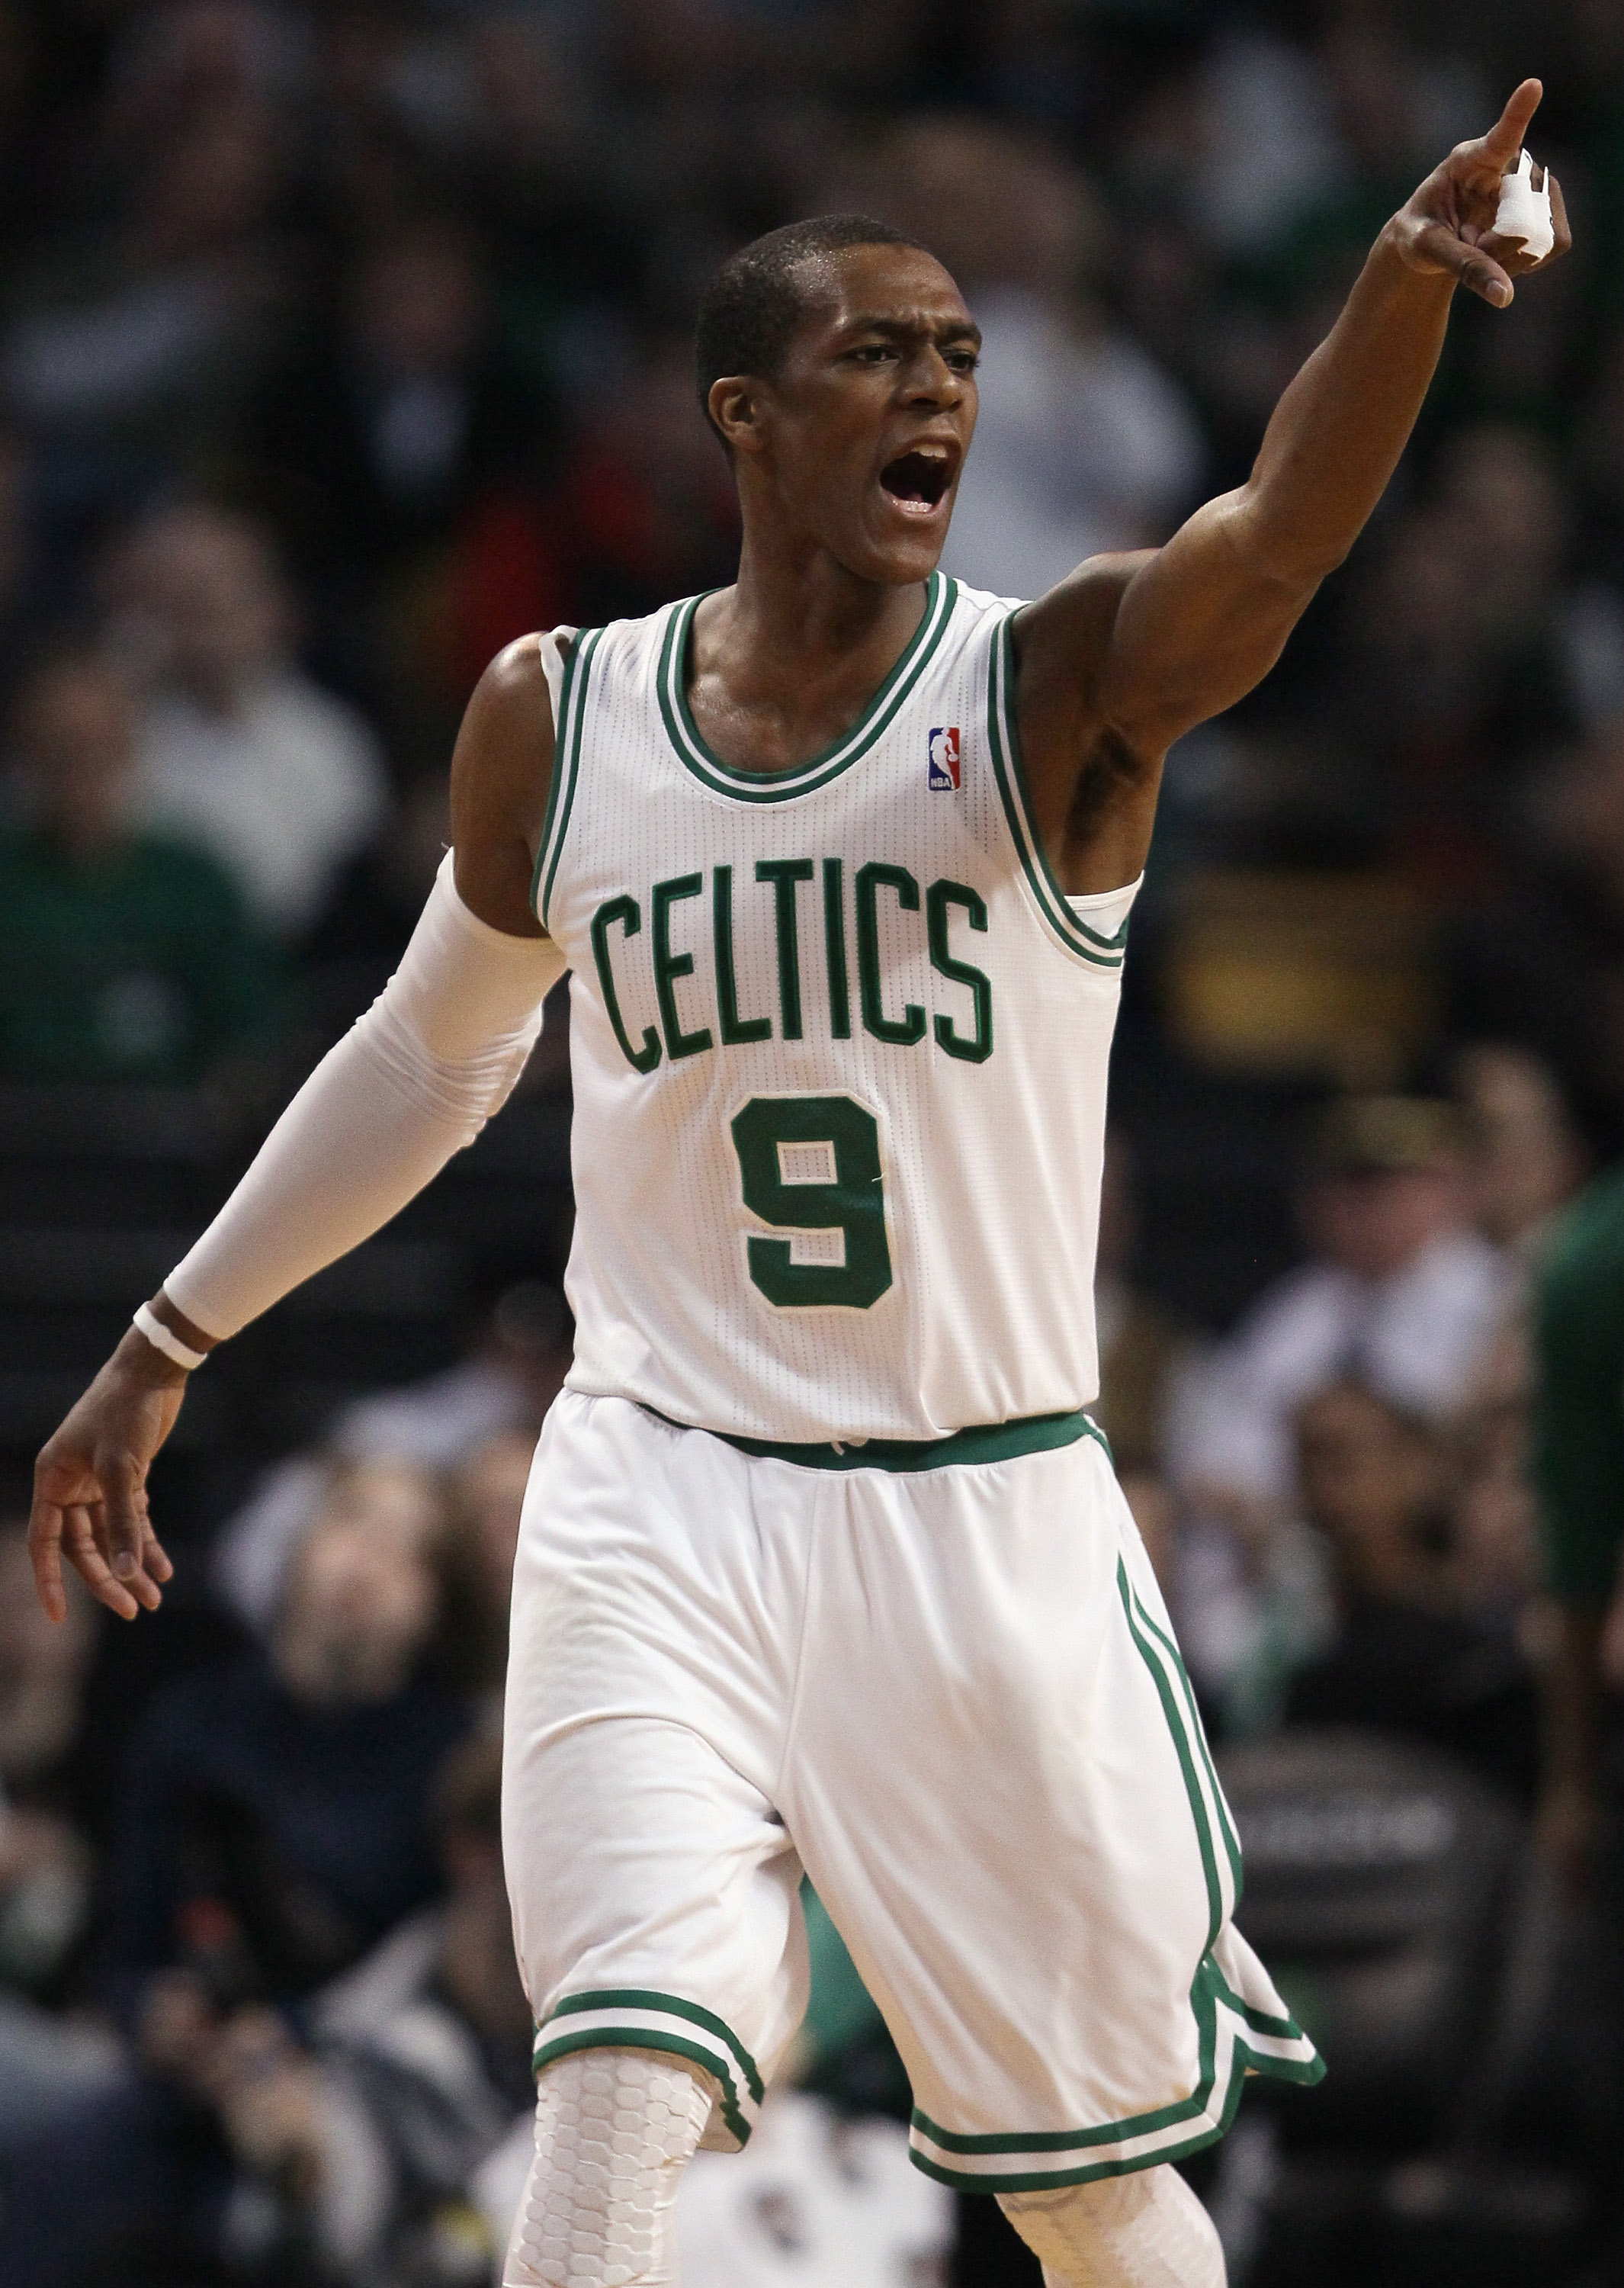 BOSTON, MA - MARCH 04:  Rajon Rondo #9 of the Boston Celtics calls out to his teammates in the first half against the Golden State Warriors on March 4, 2011 at the TD Garden in Boston, Massachusetts.  NOTE TO USER: User expressly acknowledges and agrees t